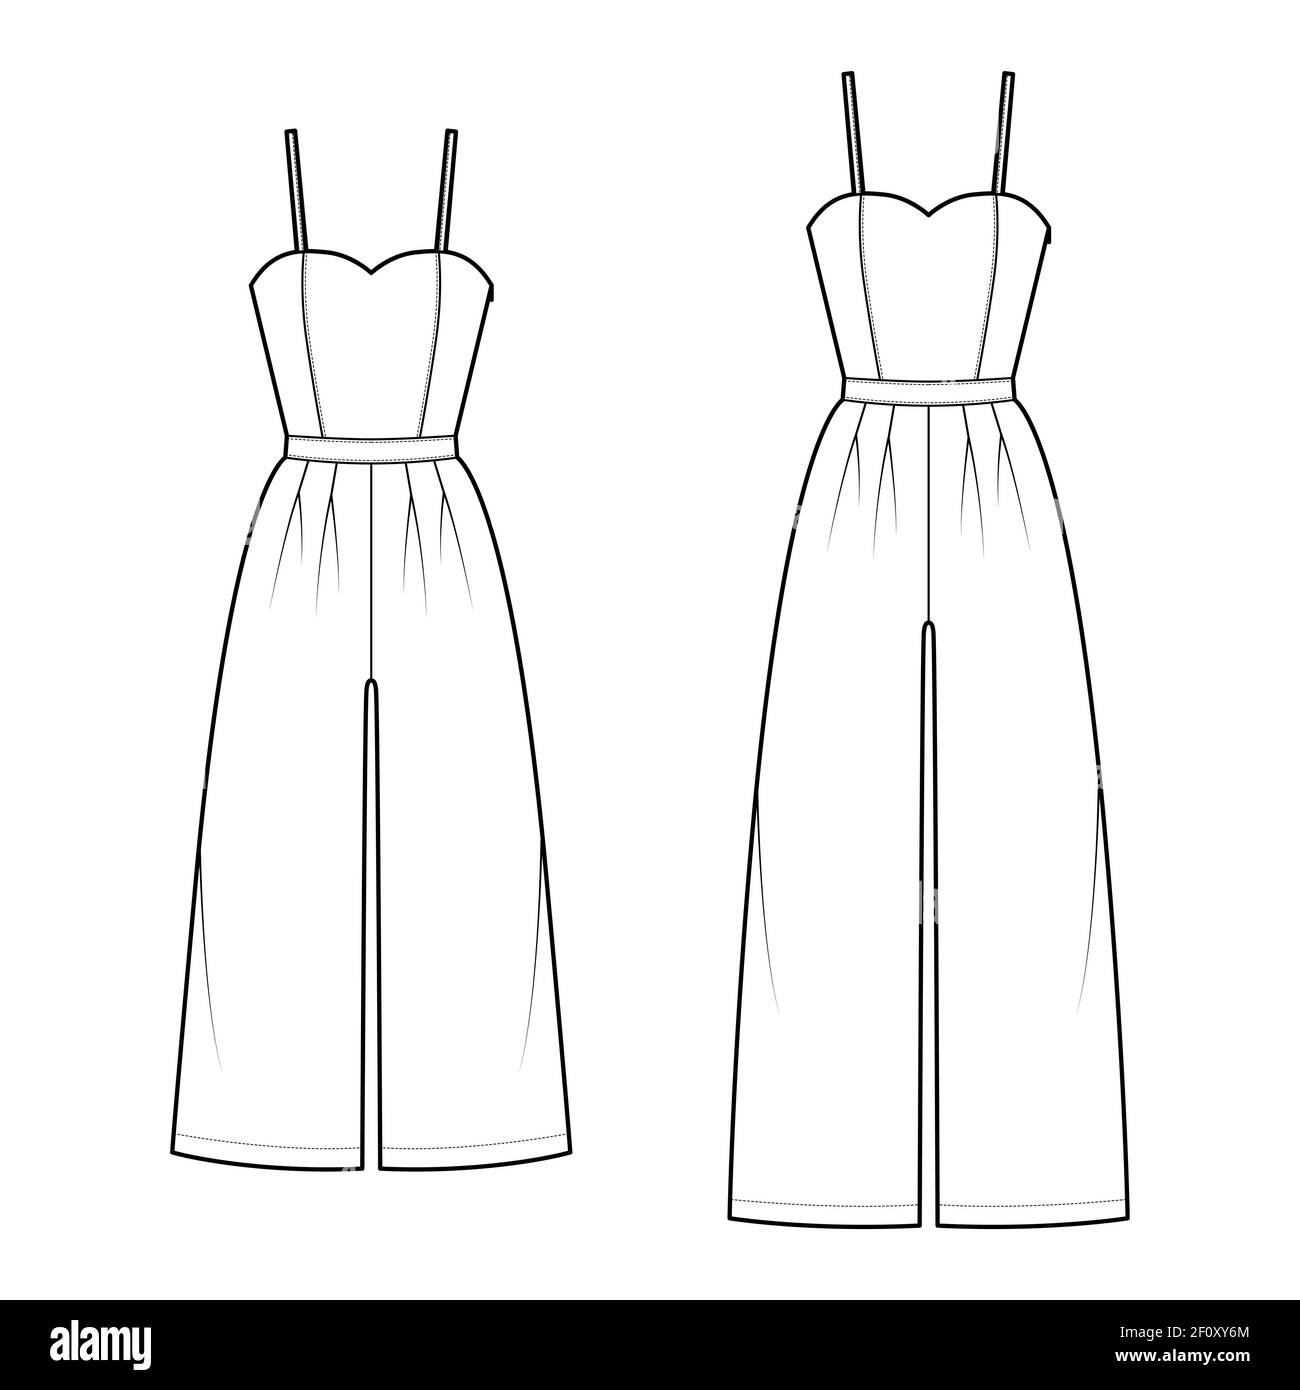 sewing pattern jumpsuit  Google Search  Fashion Fashion drawing dresses  Fashion design clothes